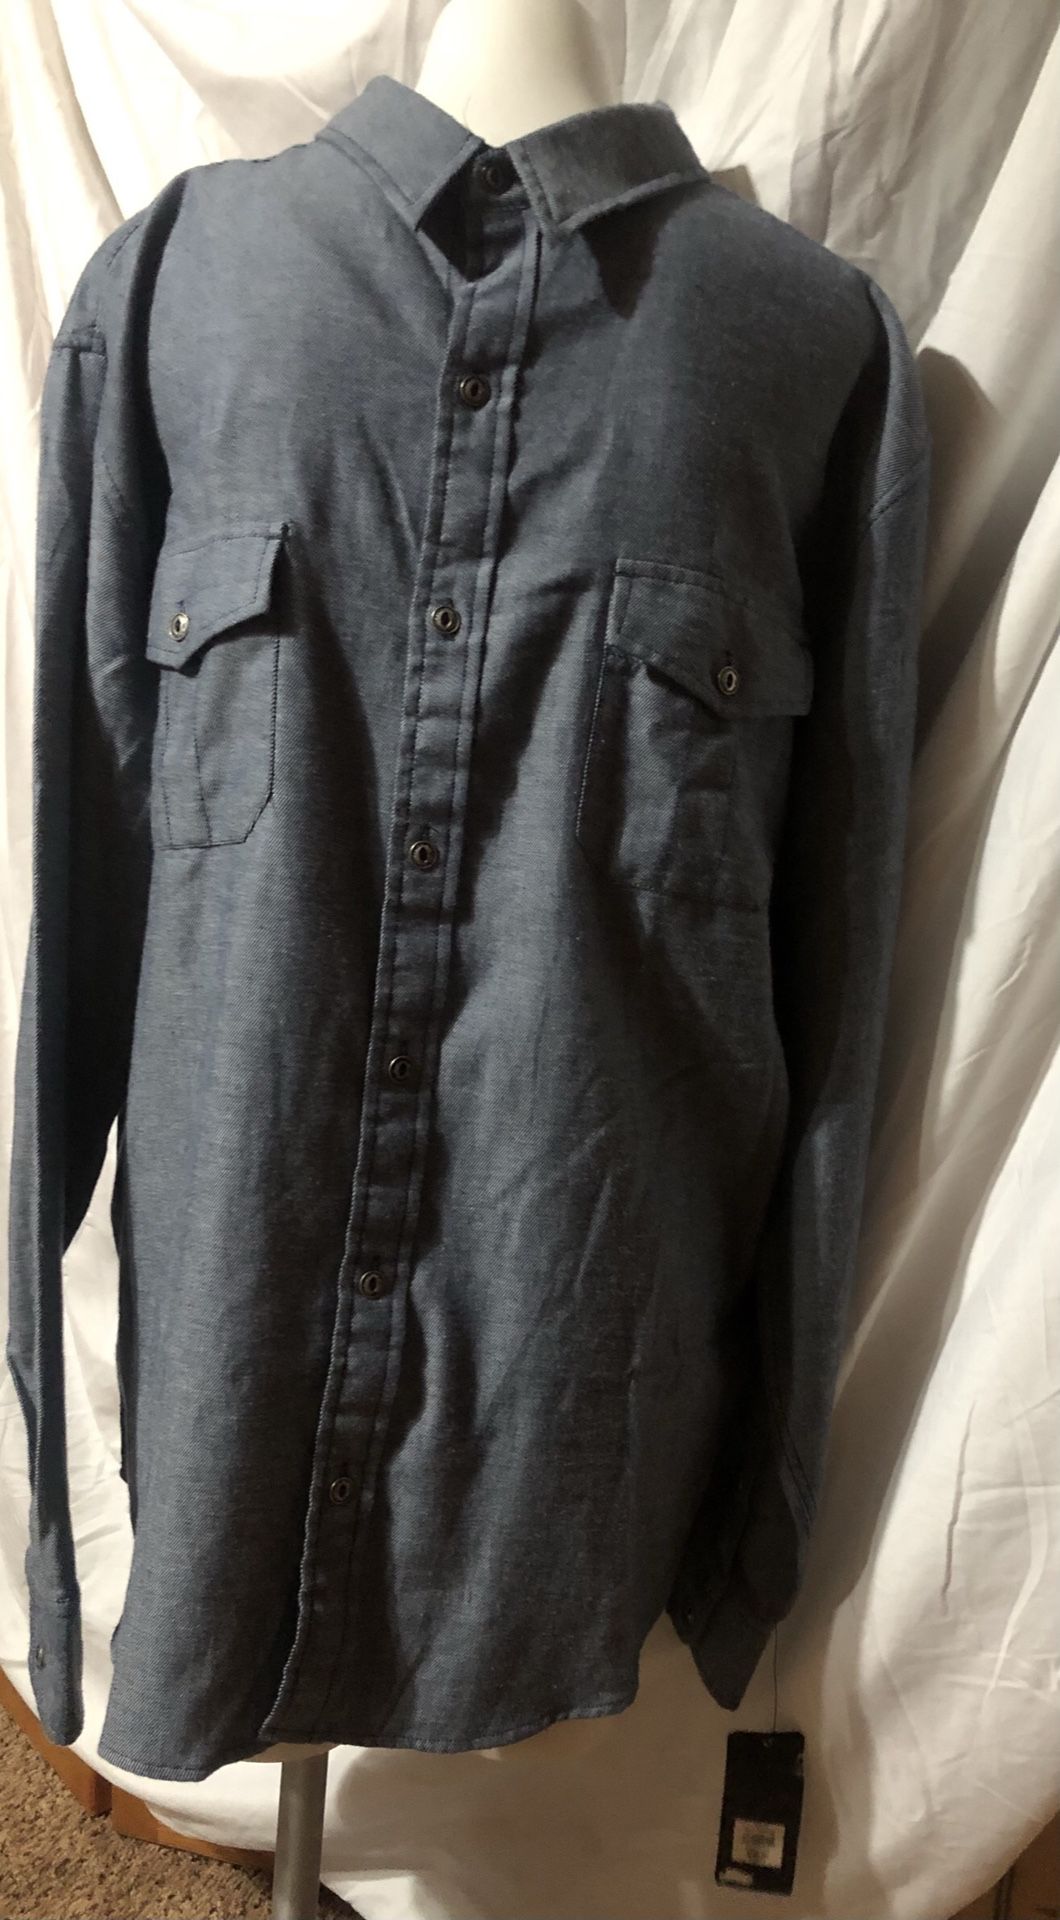 TH Button Down In Men’s XL New With Tags More Like A Tall With Extra Sleeve Length 